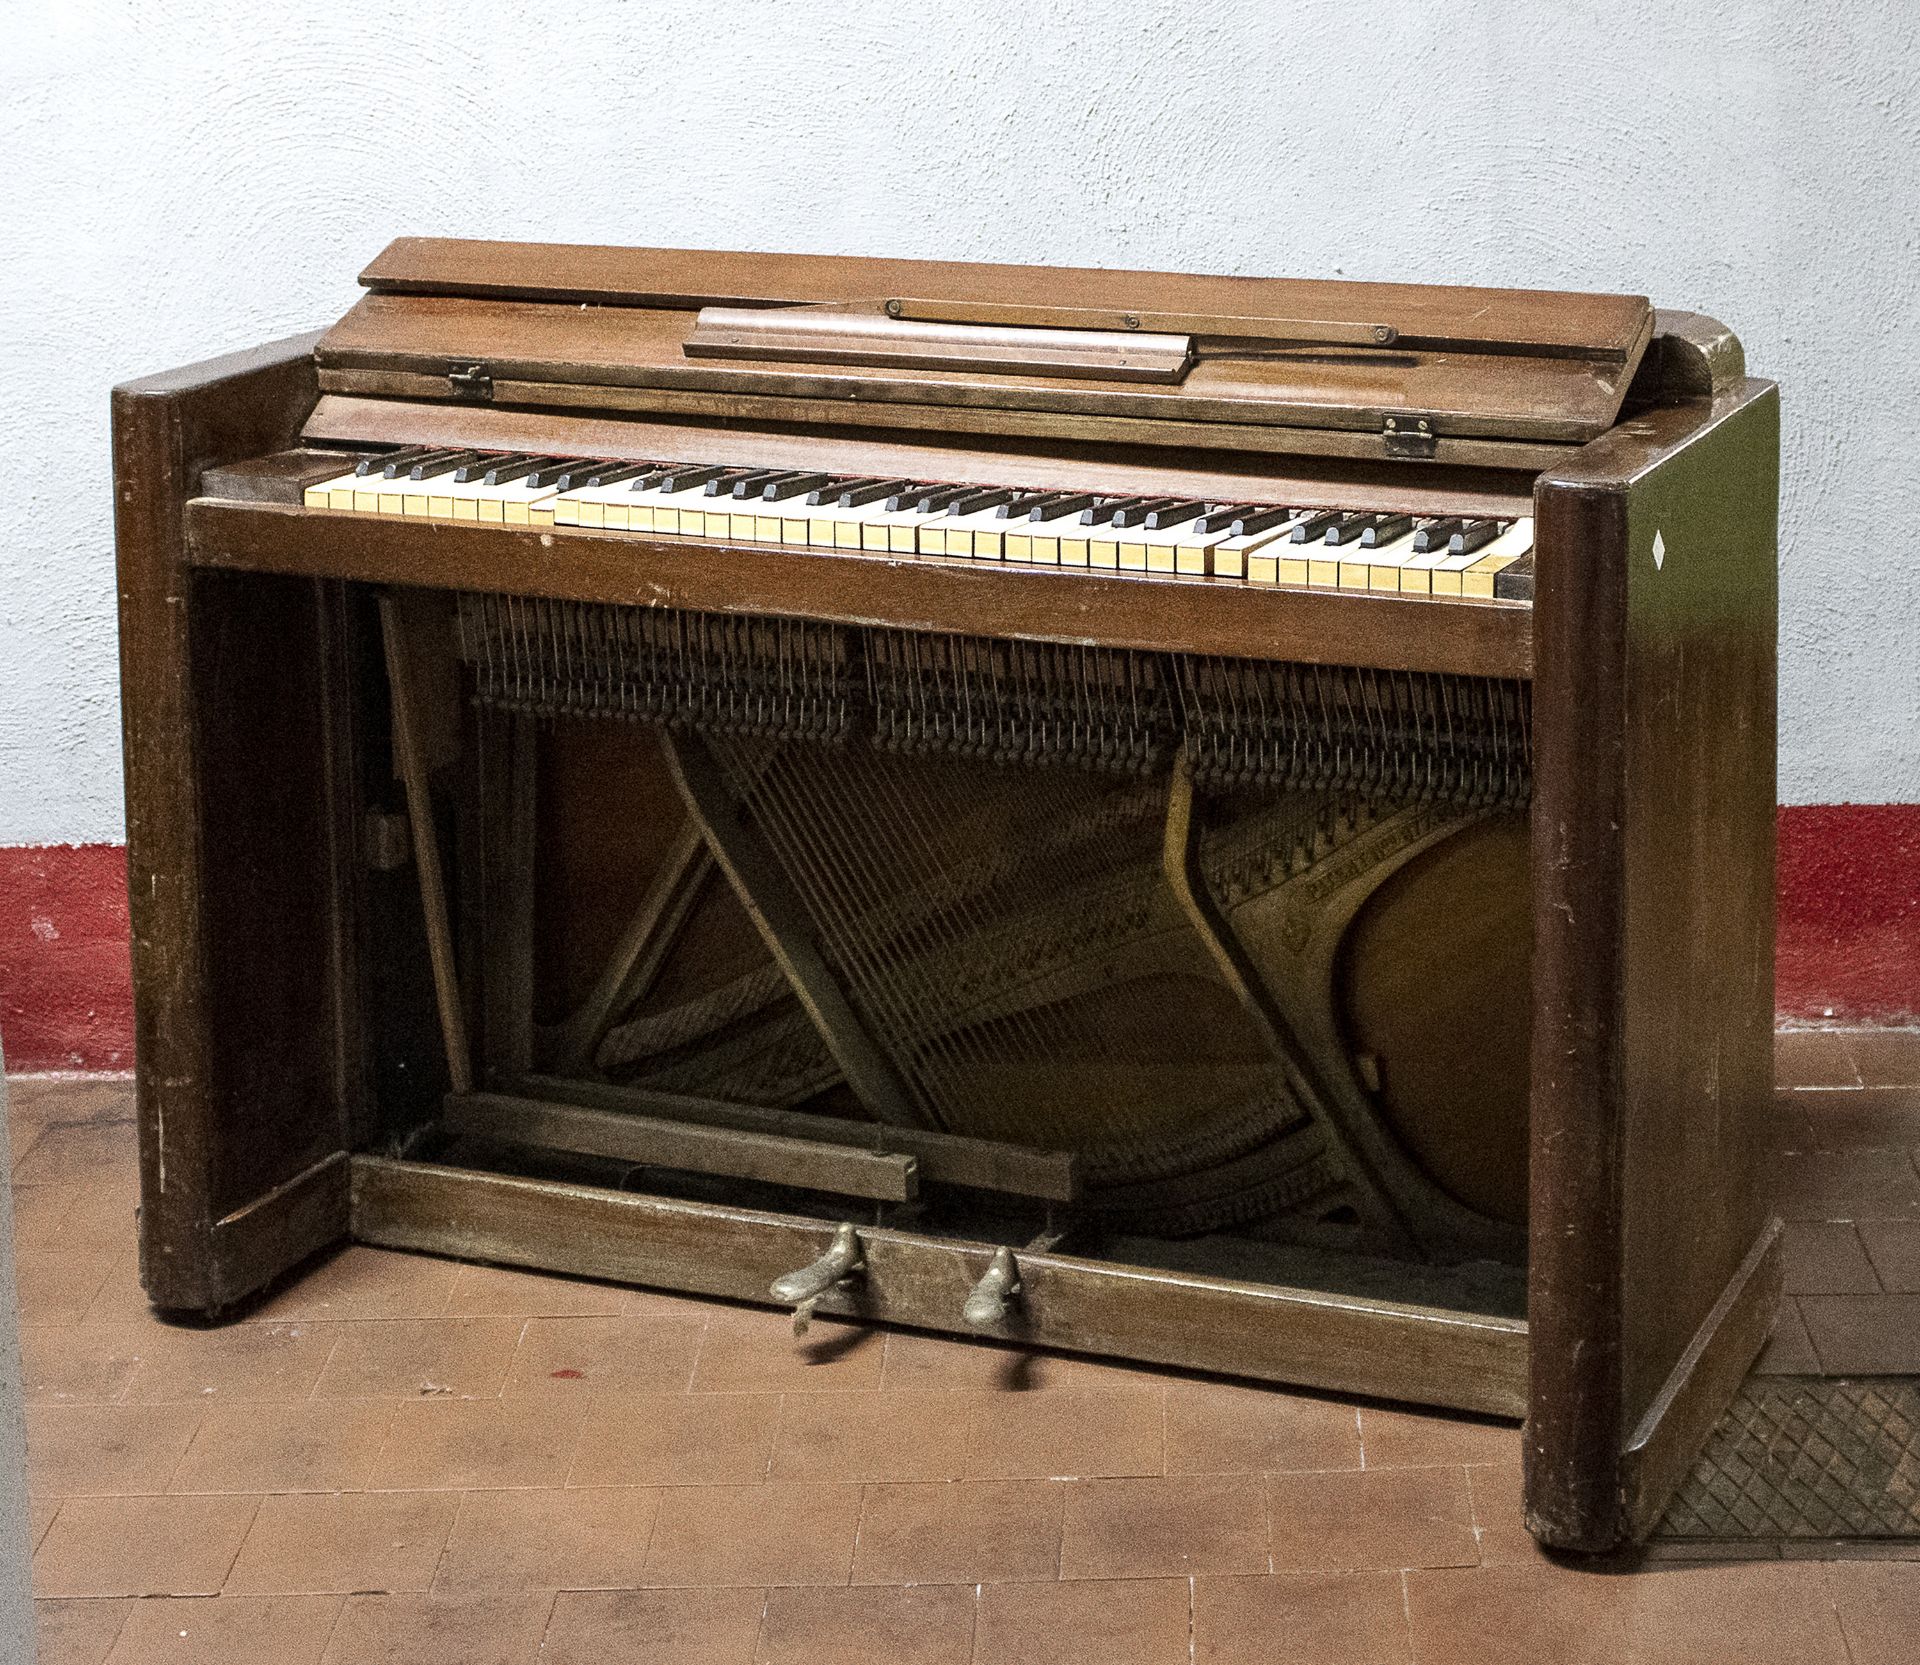 REMAINS OF PIANO 20TH CENTURY